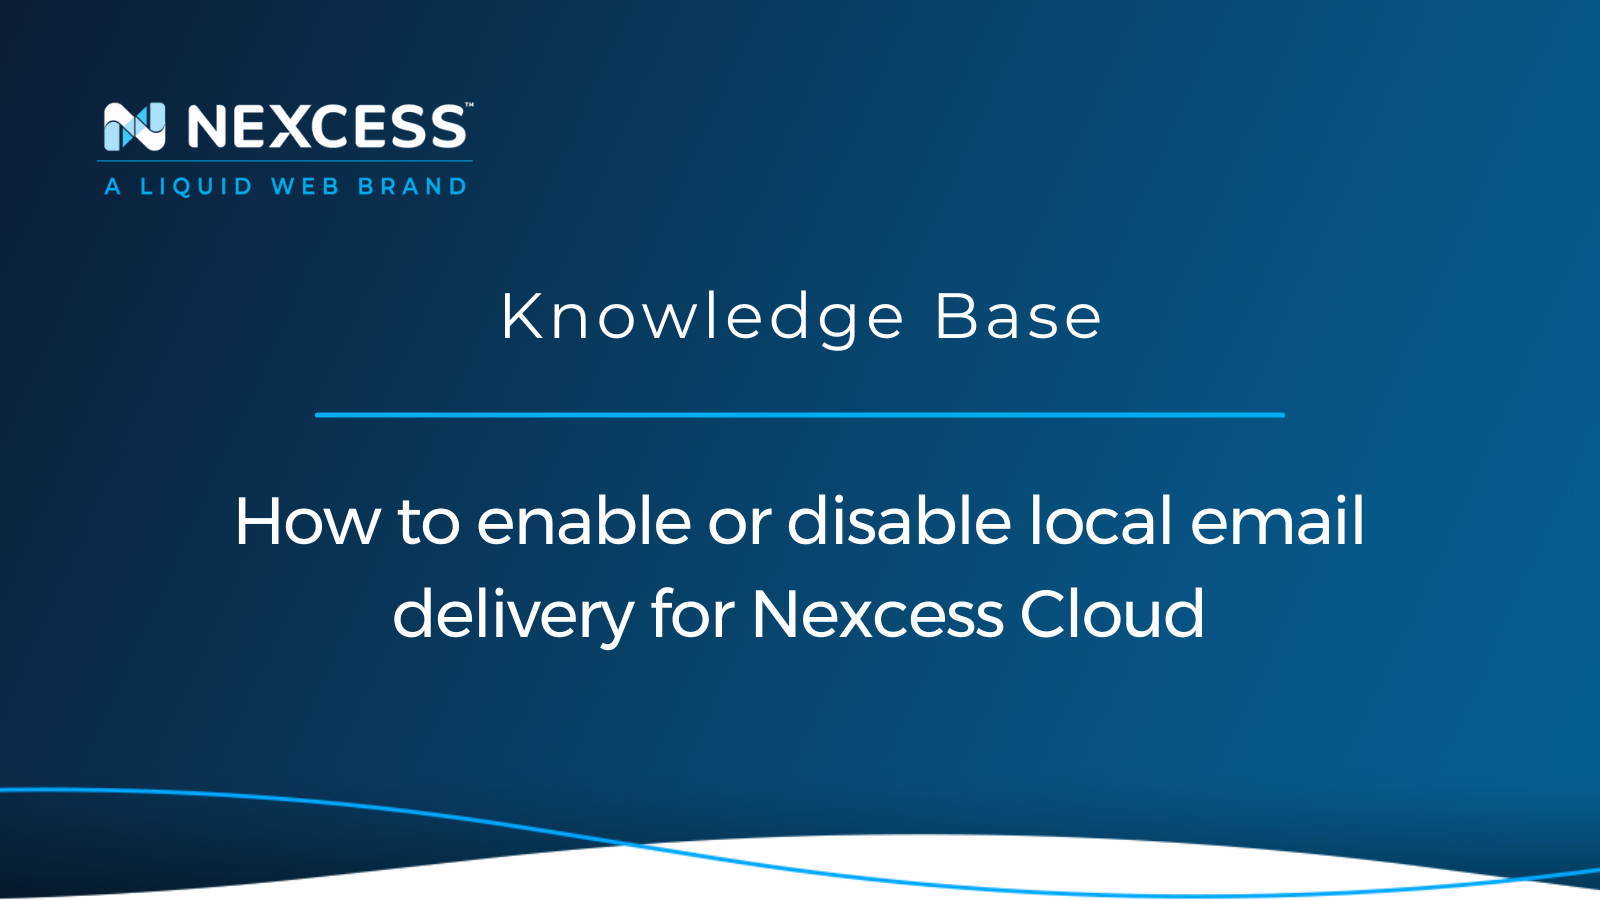 How to enable or disable local email delivery for Nexcess Cloud